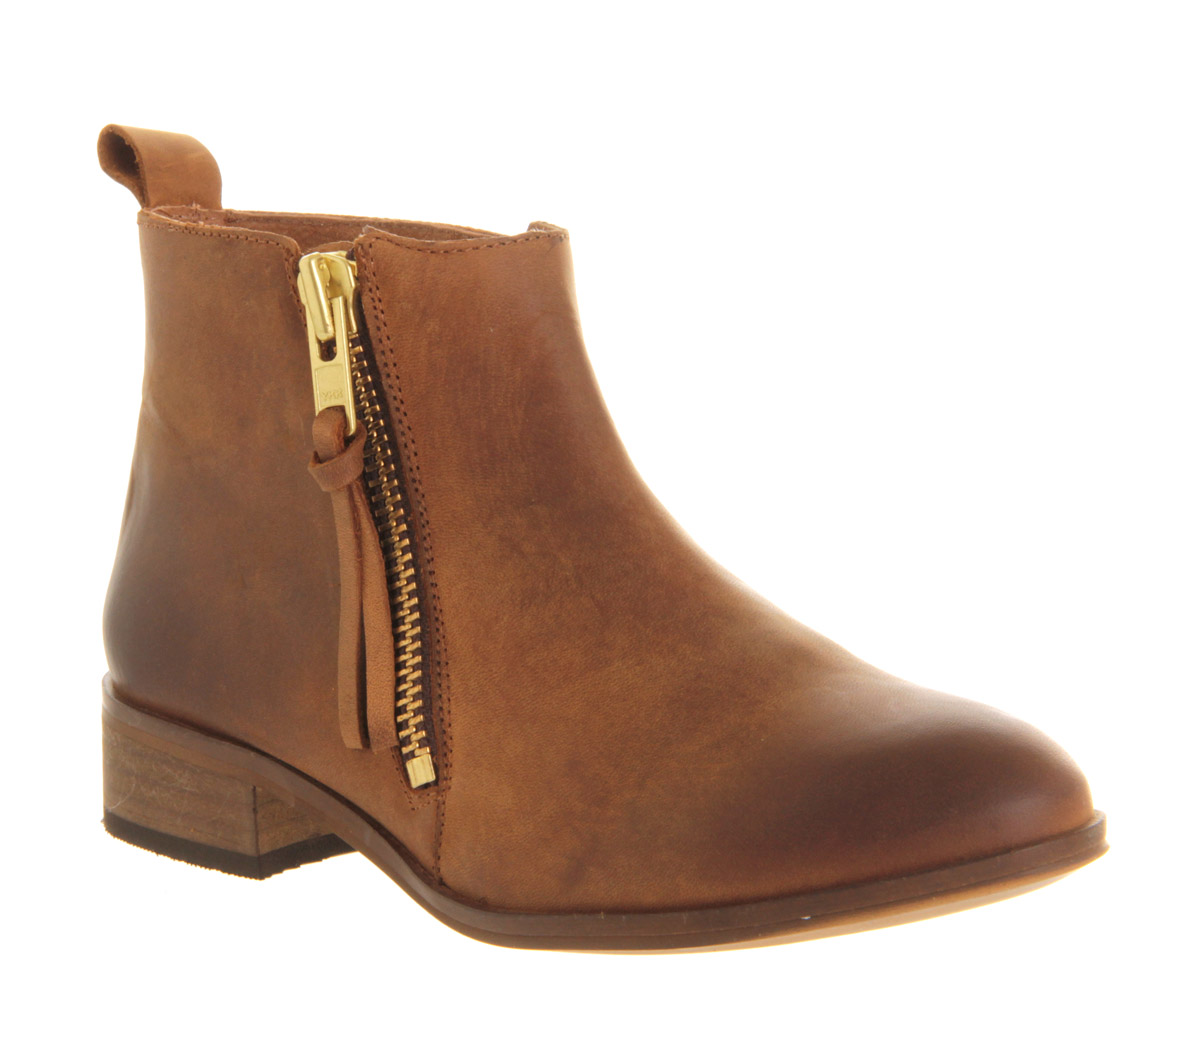 OFFICEMambo 2 Ankle BootsBrown Leather